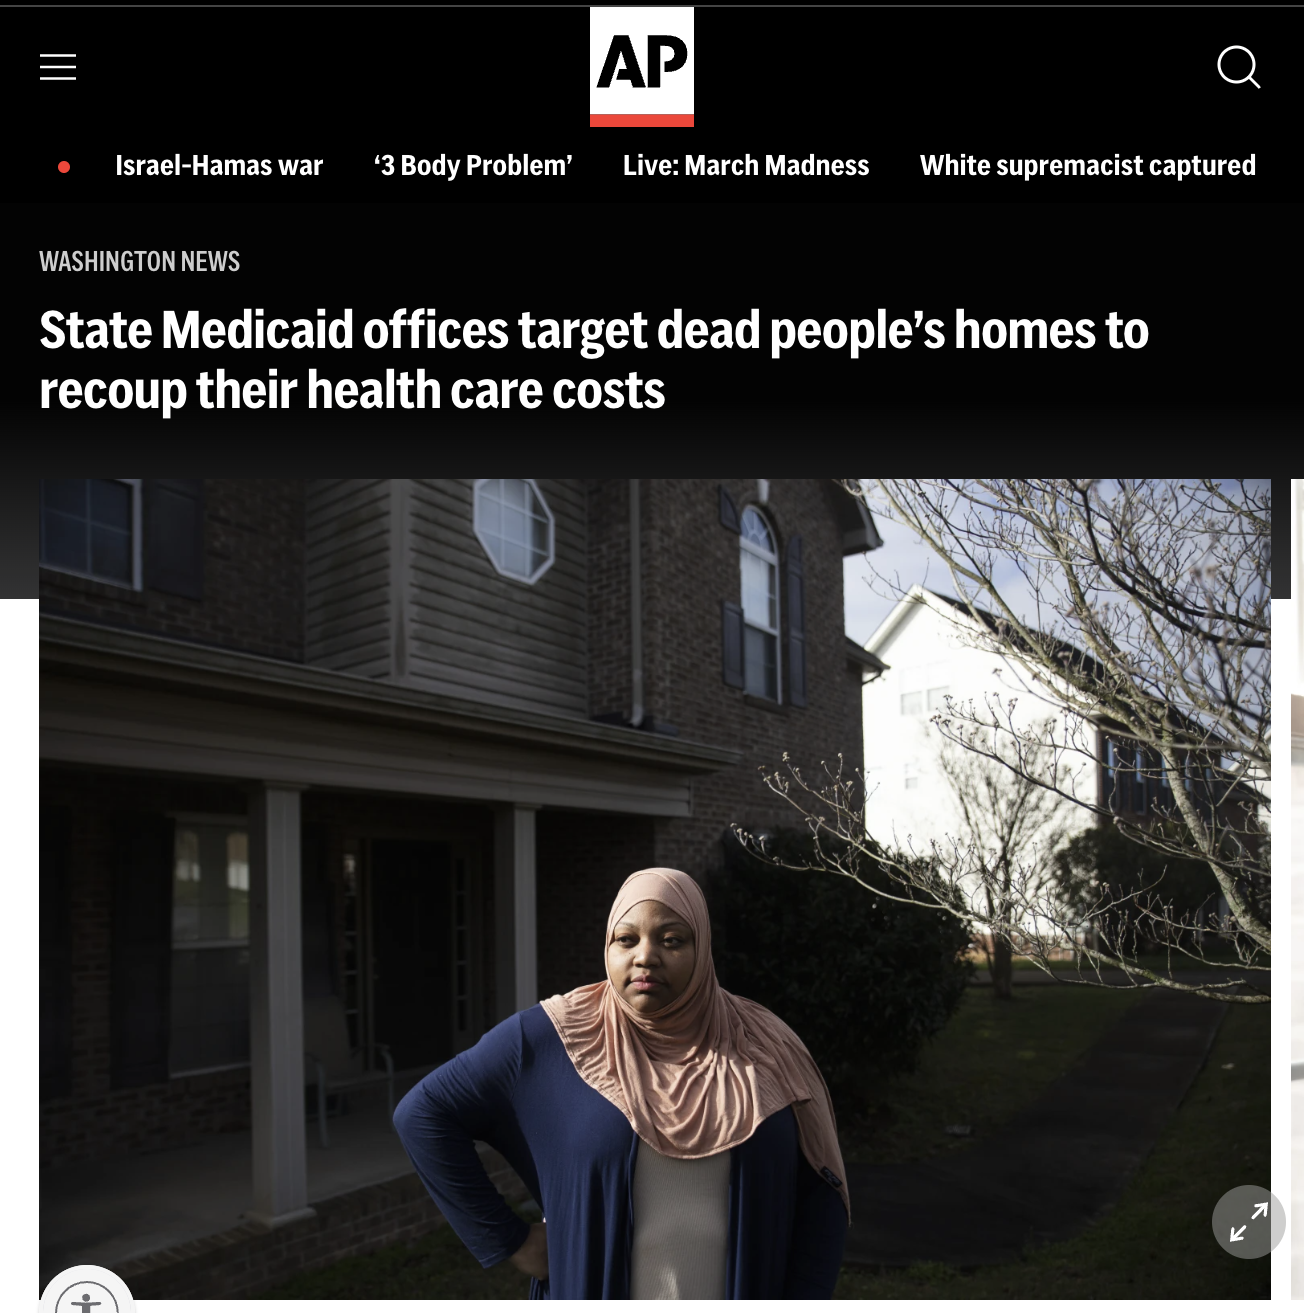 photo caption - Ap IsraelHamas war 3 Body Problem' Live March Madness White supremacist captured Washington News State Medicaid offices target dead people's homes to recoup their health care costs